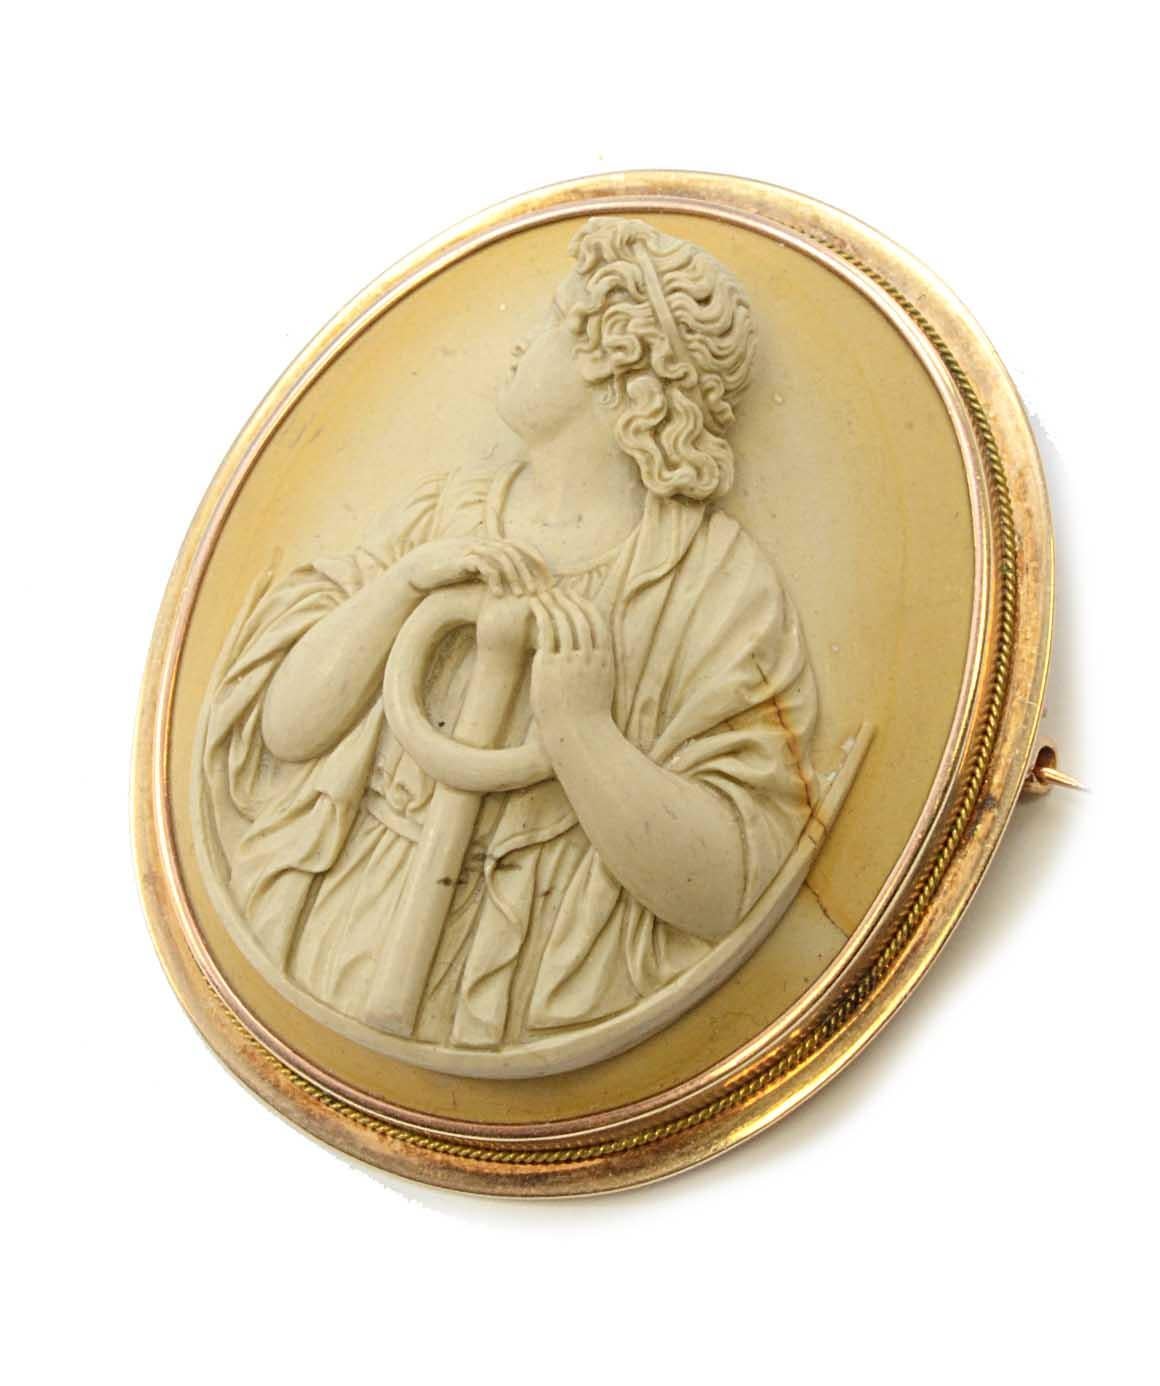 Solid 14K Yellow Gold Lava Cameo Brooch 23.9g Excellent condition! This solid 14k yellow gold cameo is carved from lava. The brooch measures approximately 1.95 inches X 1.75 inches and weighs 23.9 grams. It is open back.